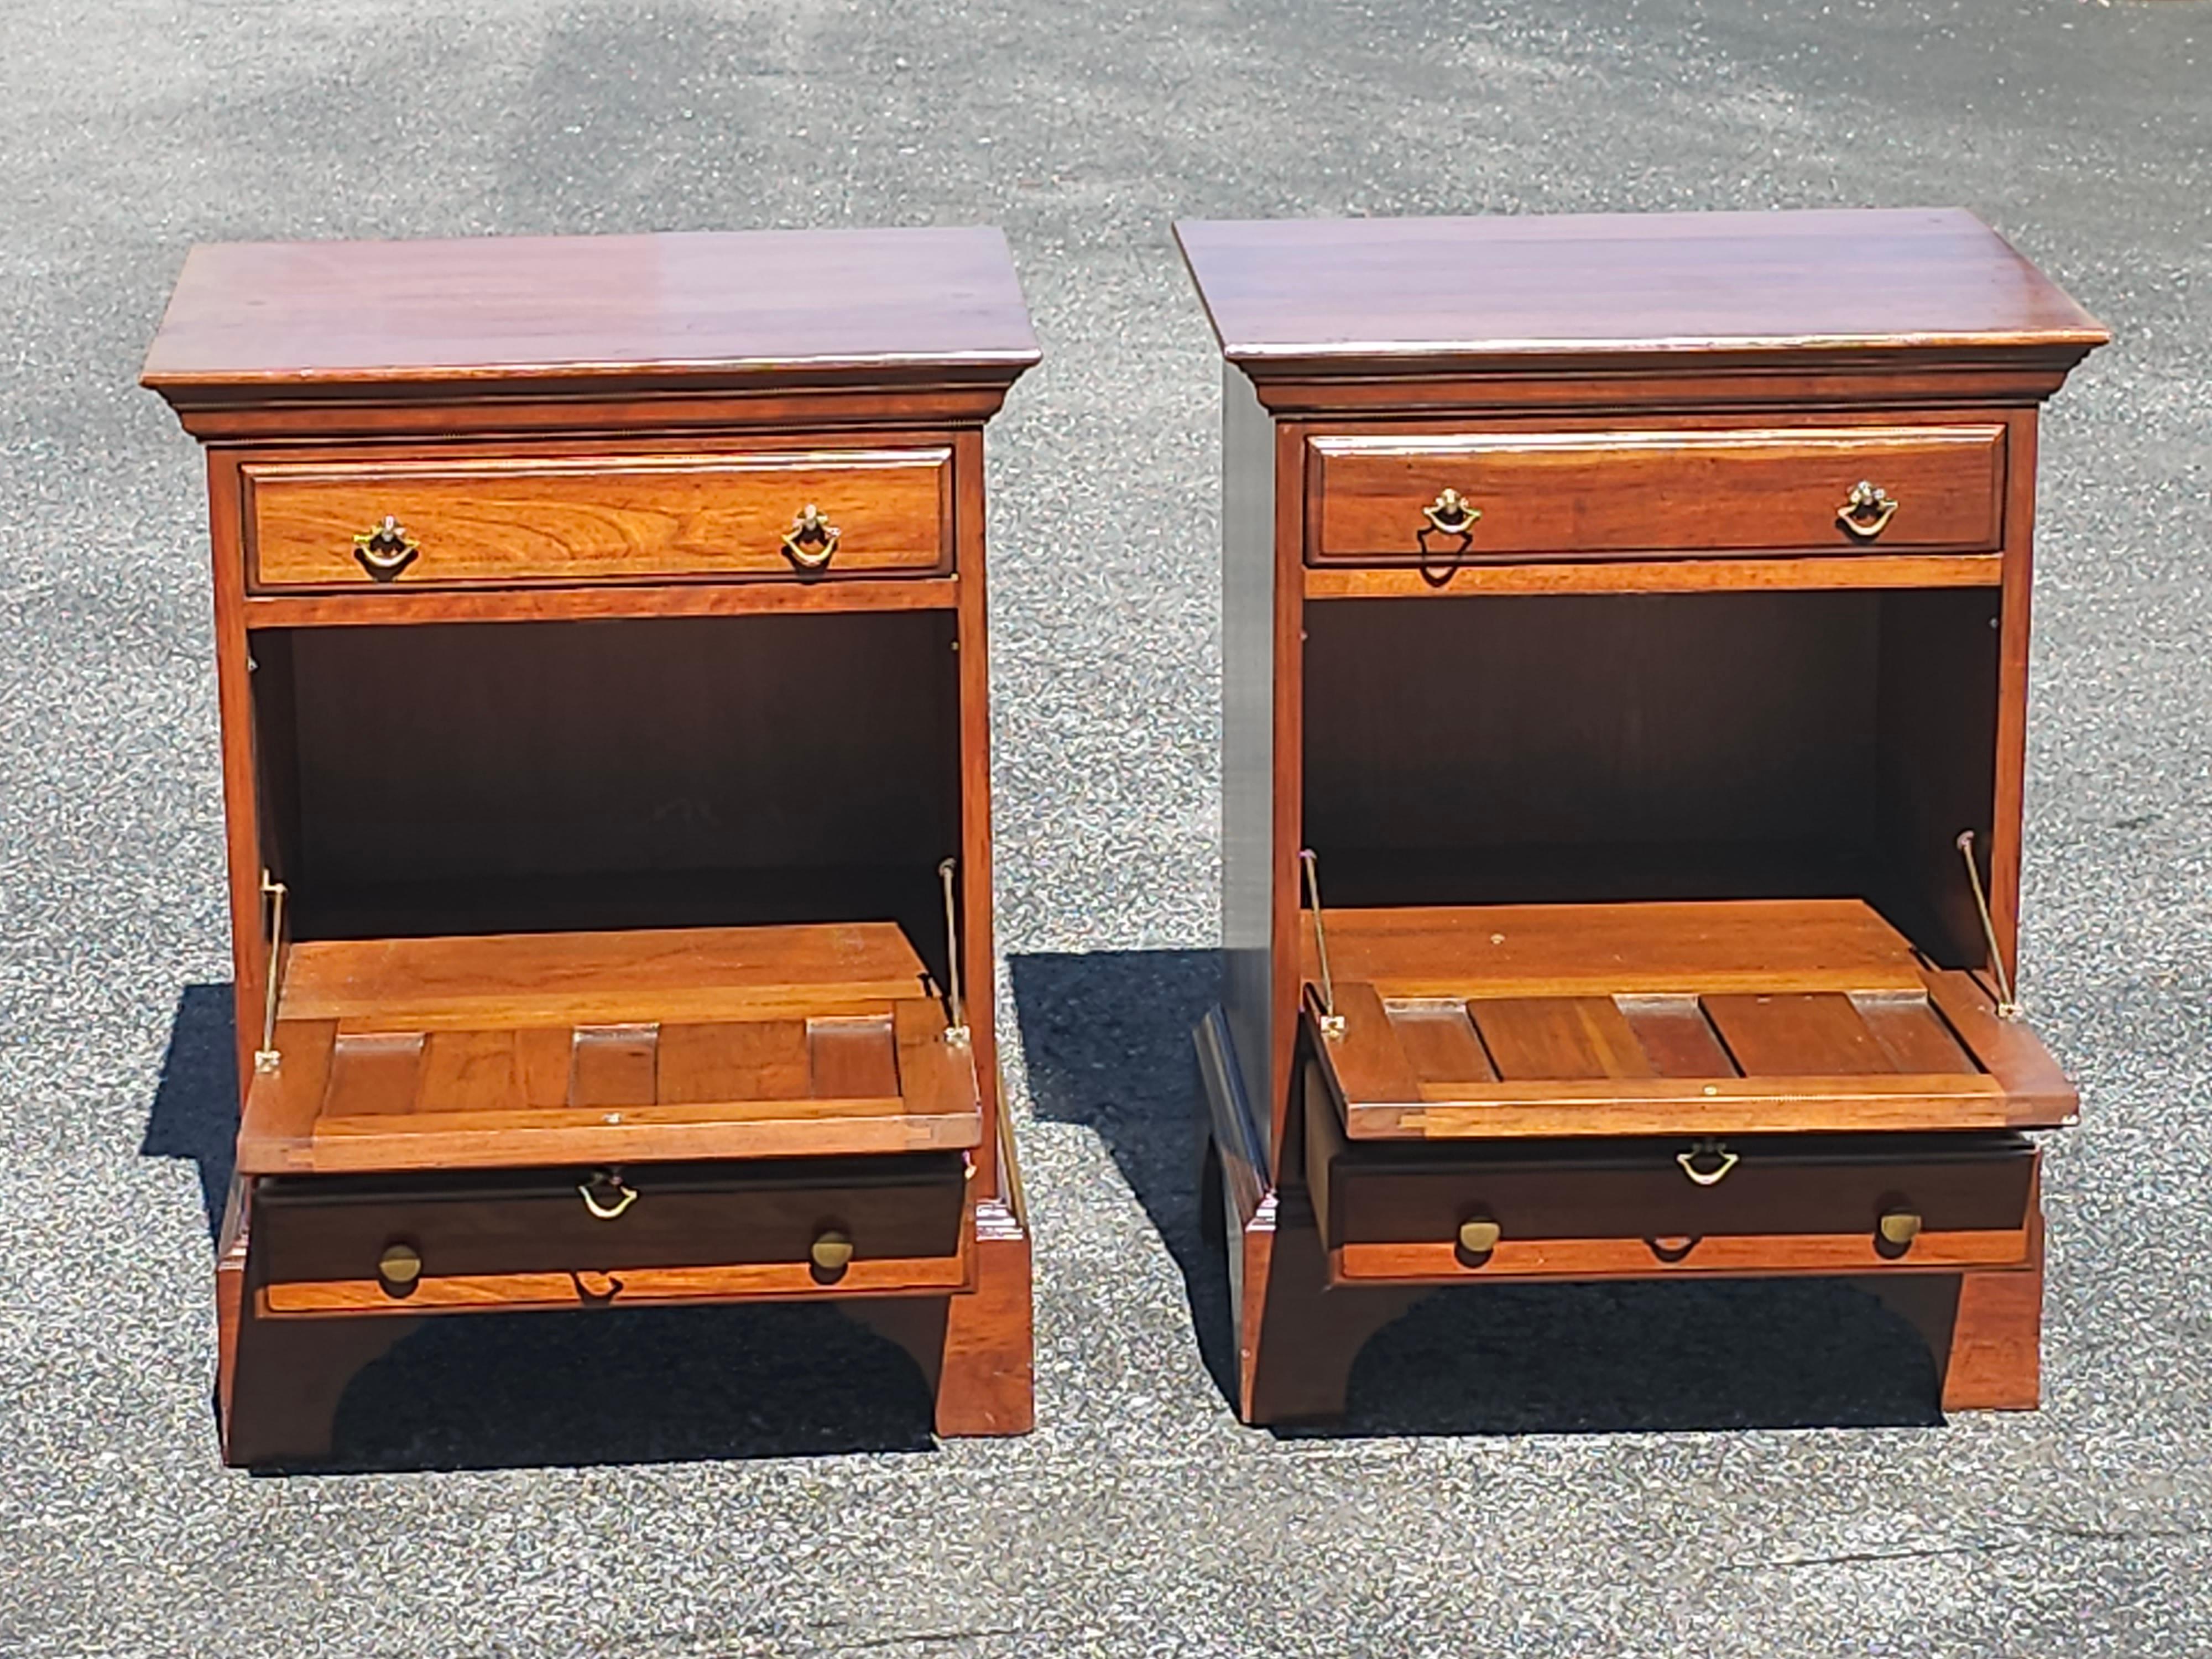 20th Century David Cabinet Cherry 2-Drawer a Abattant Door Bedside Cabinets Pair For Sale 2